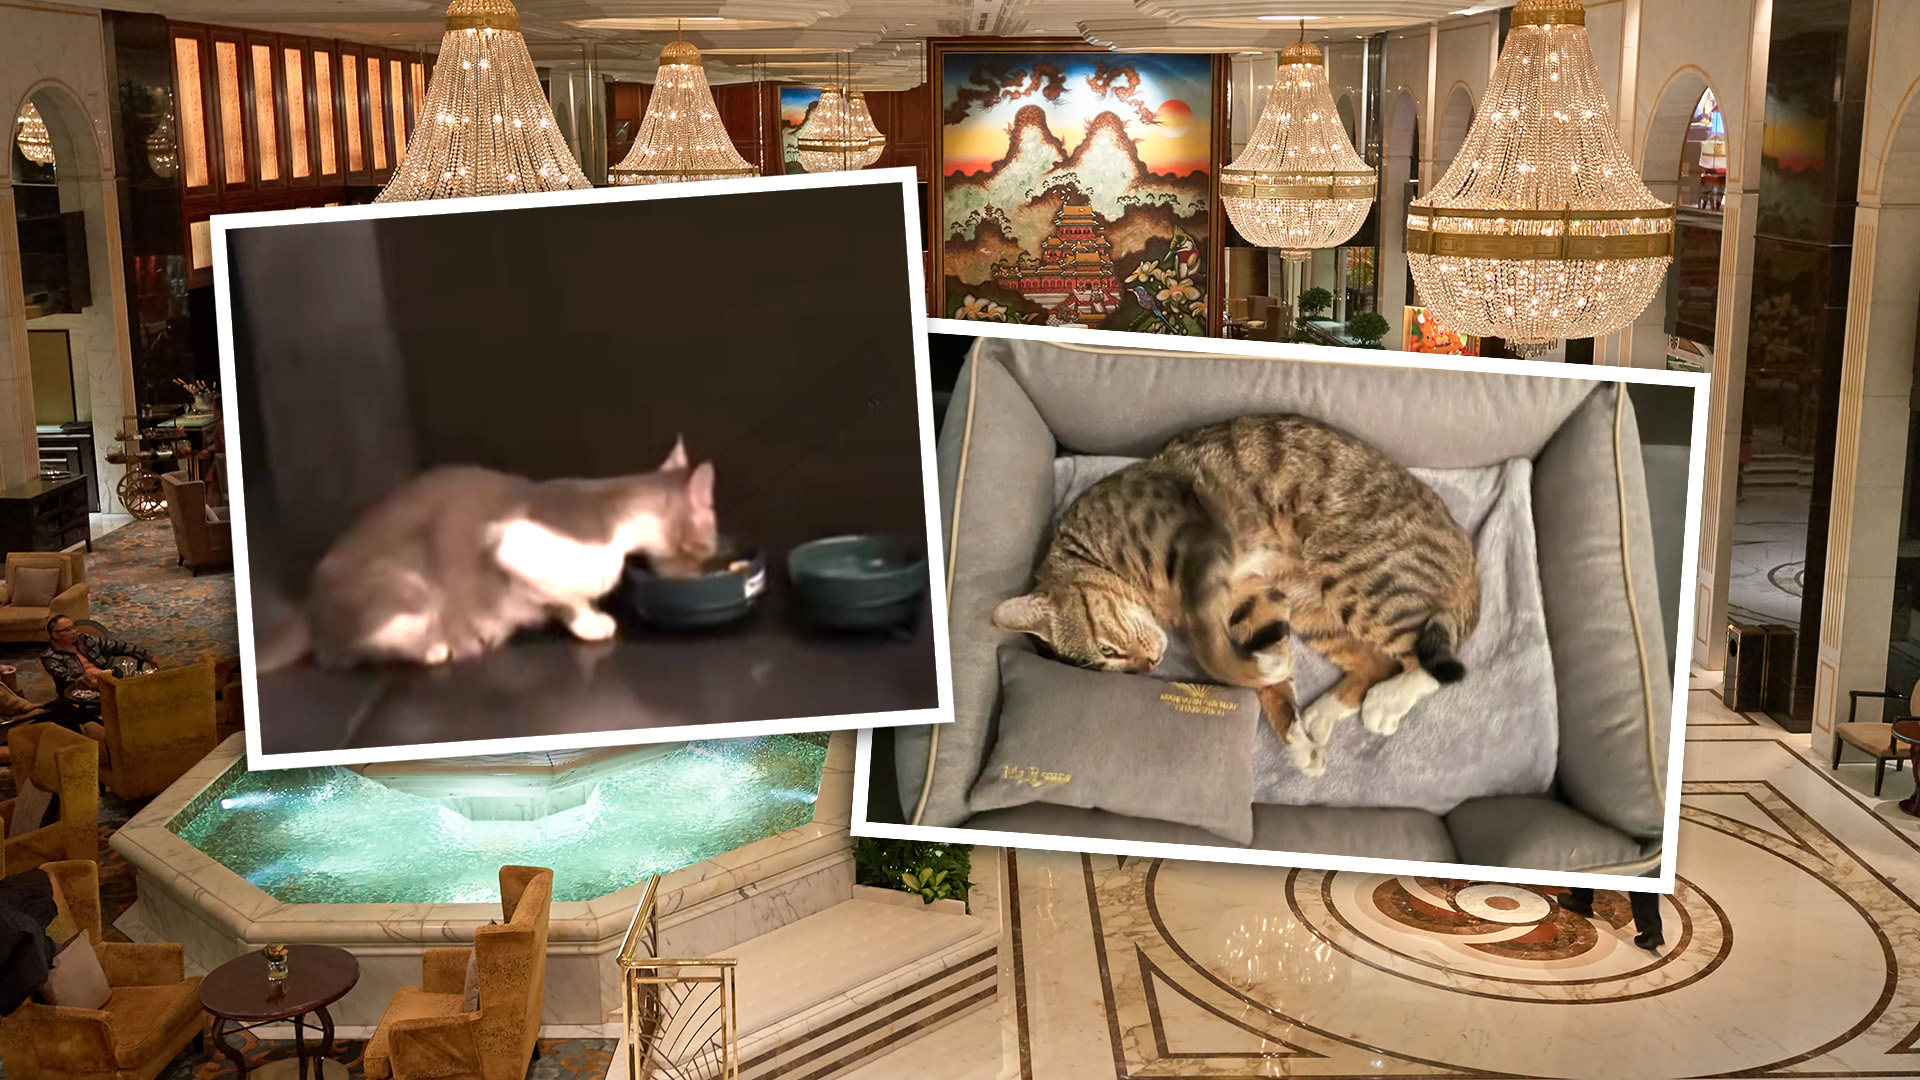 A five-star hotel in China has set aside space in its opulent entrance area for stray cats, delighting animal lovers on mainland social media. Photo: SCMP composite/Shutterstock/Douyin